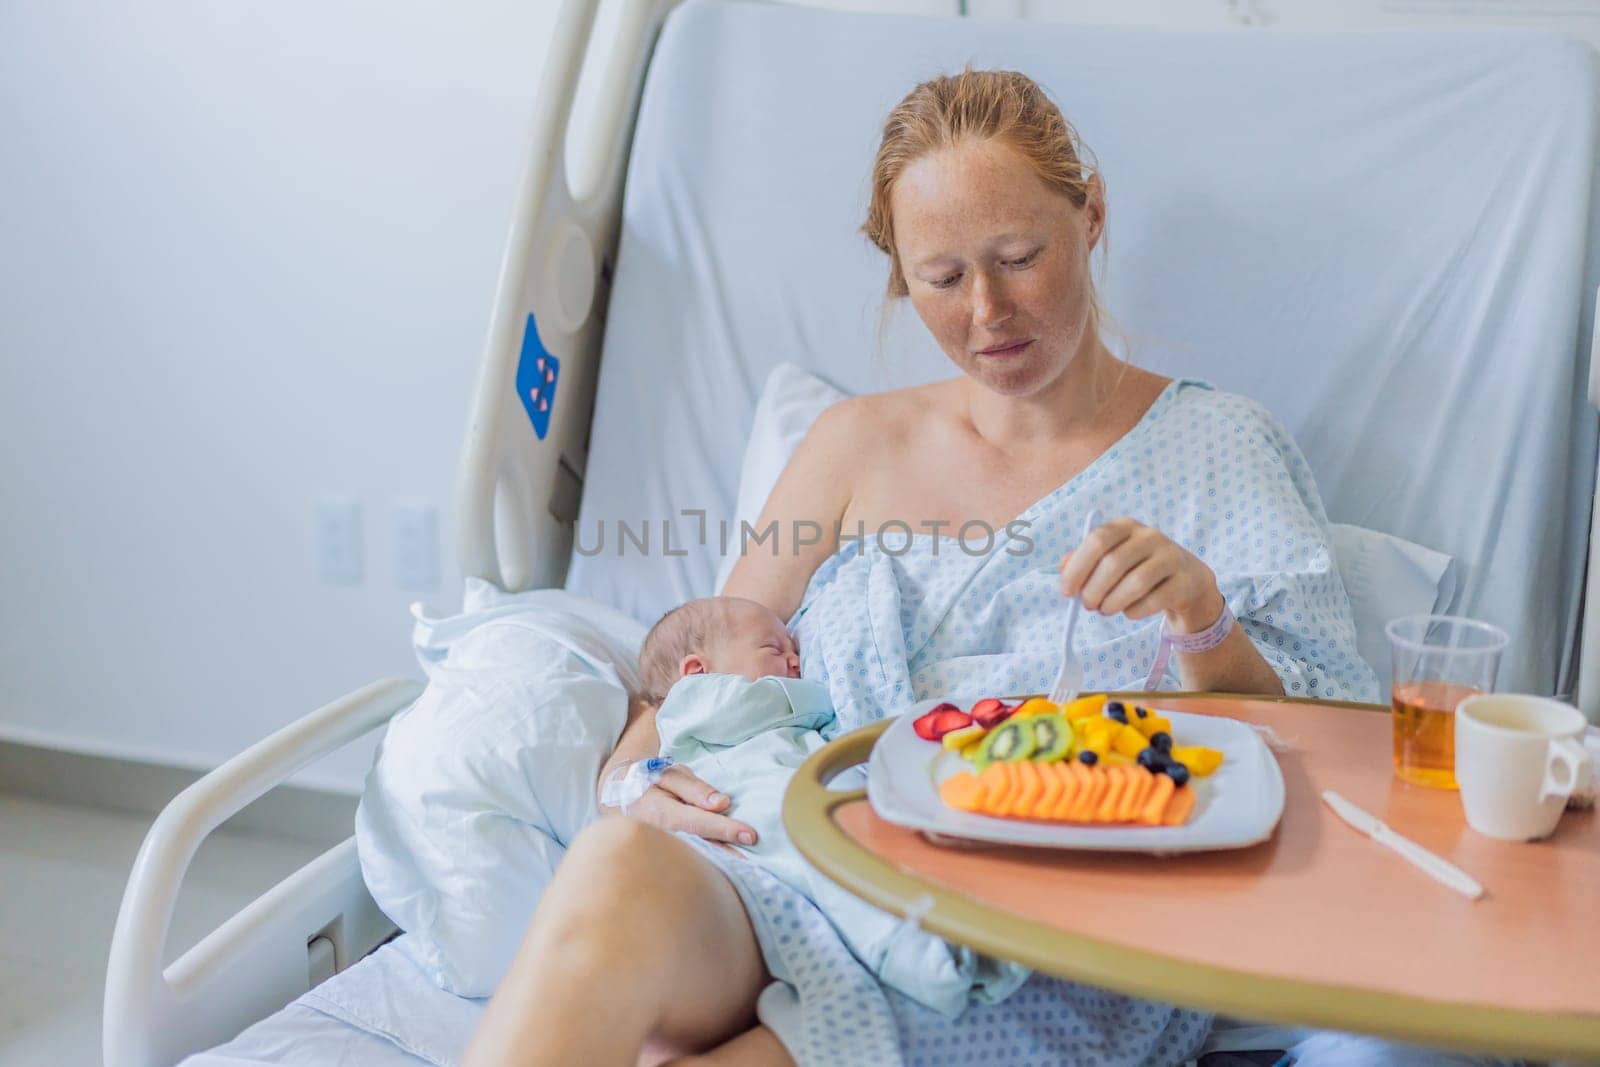 A woman breastfeeds her baby in the hospital while simultaneously having lunch herself. This moment of multitasking illustrates the balance between motherhood and self-care, emphasizing maternal dedication and the nurturing atmosphere of the hospital ward by galitskaya